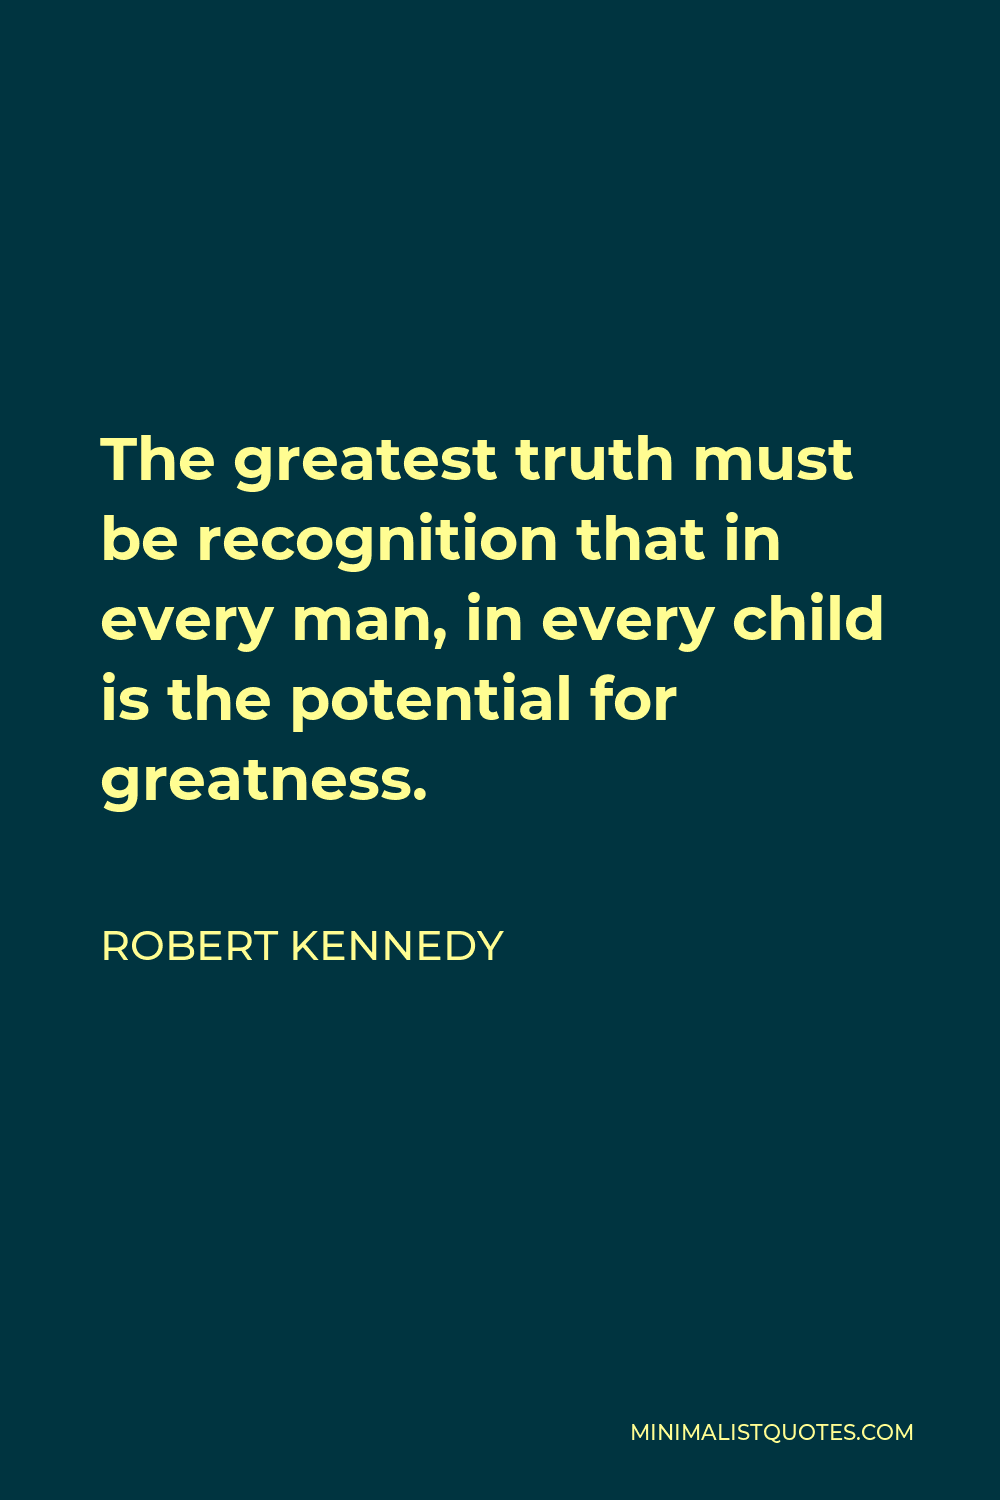 Robert Kennedy Quote - The greatest truth must be recognition that in every man, in every child is the potential for greatness.